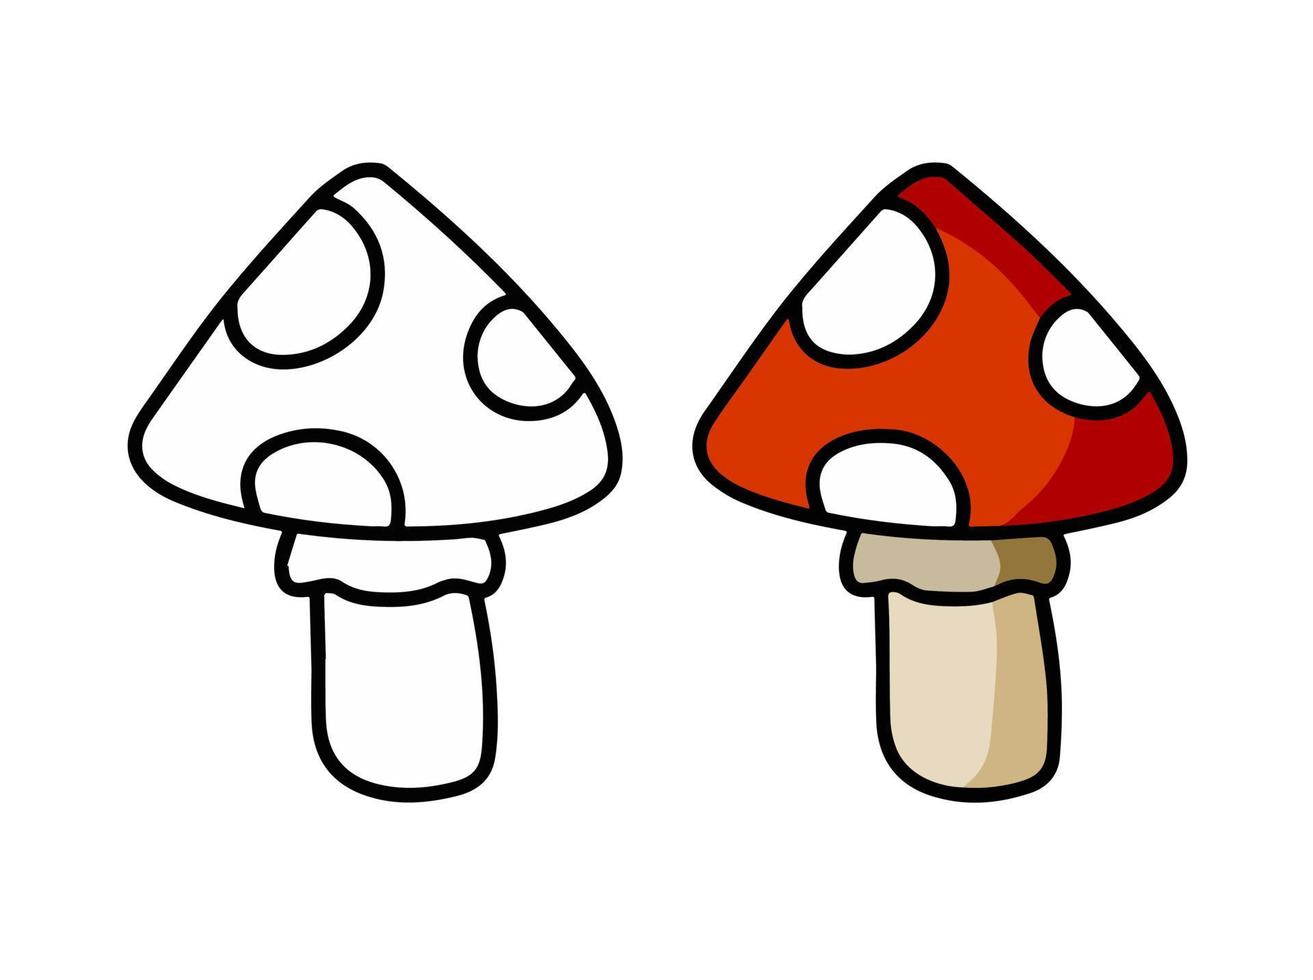 Poisonous mushroom. Fly agaric with red cap. Outline cartoon illustration vector